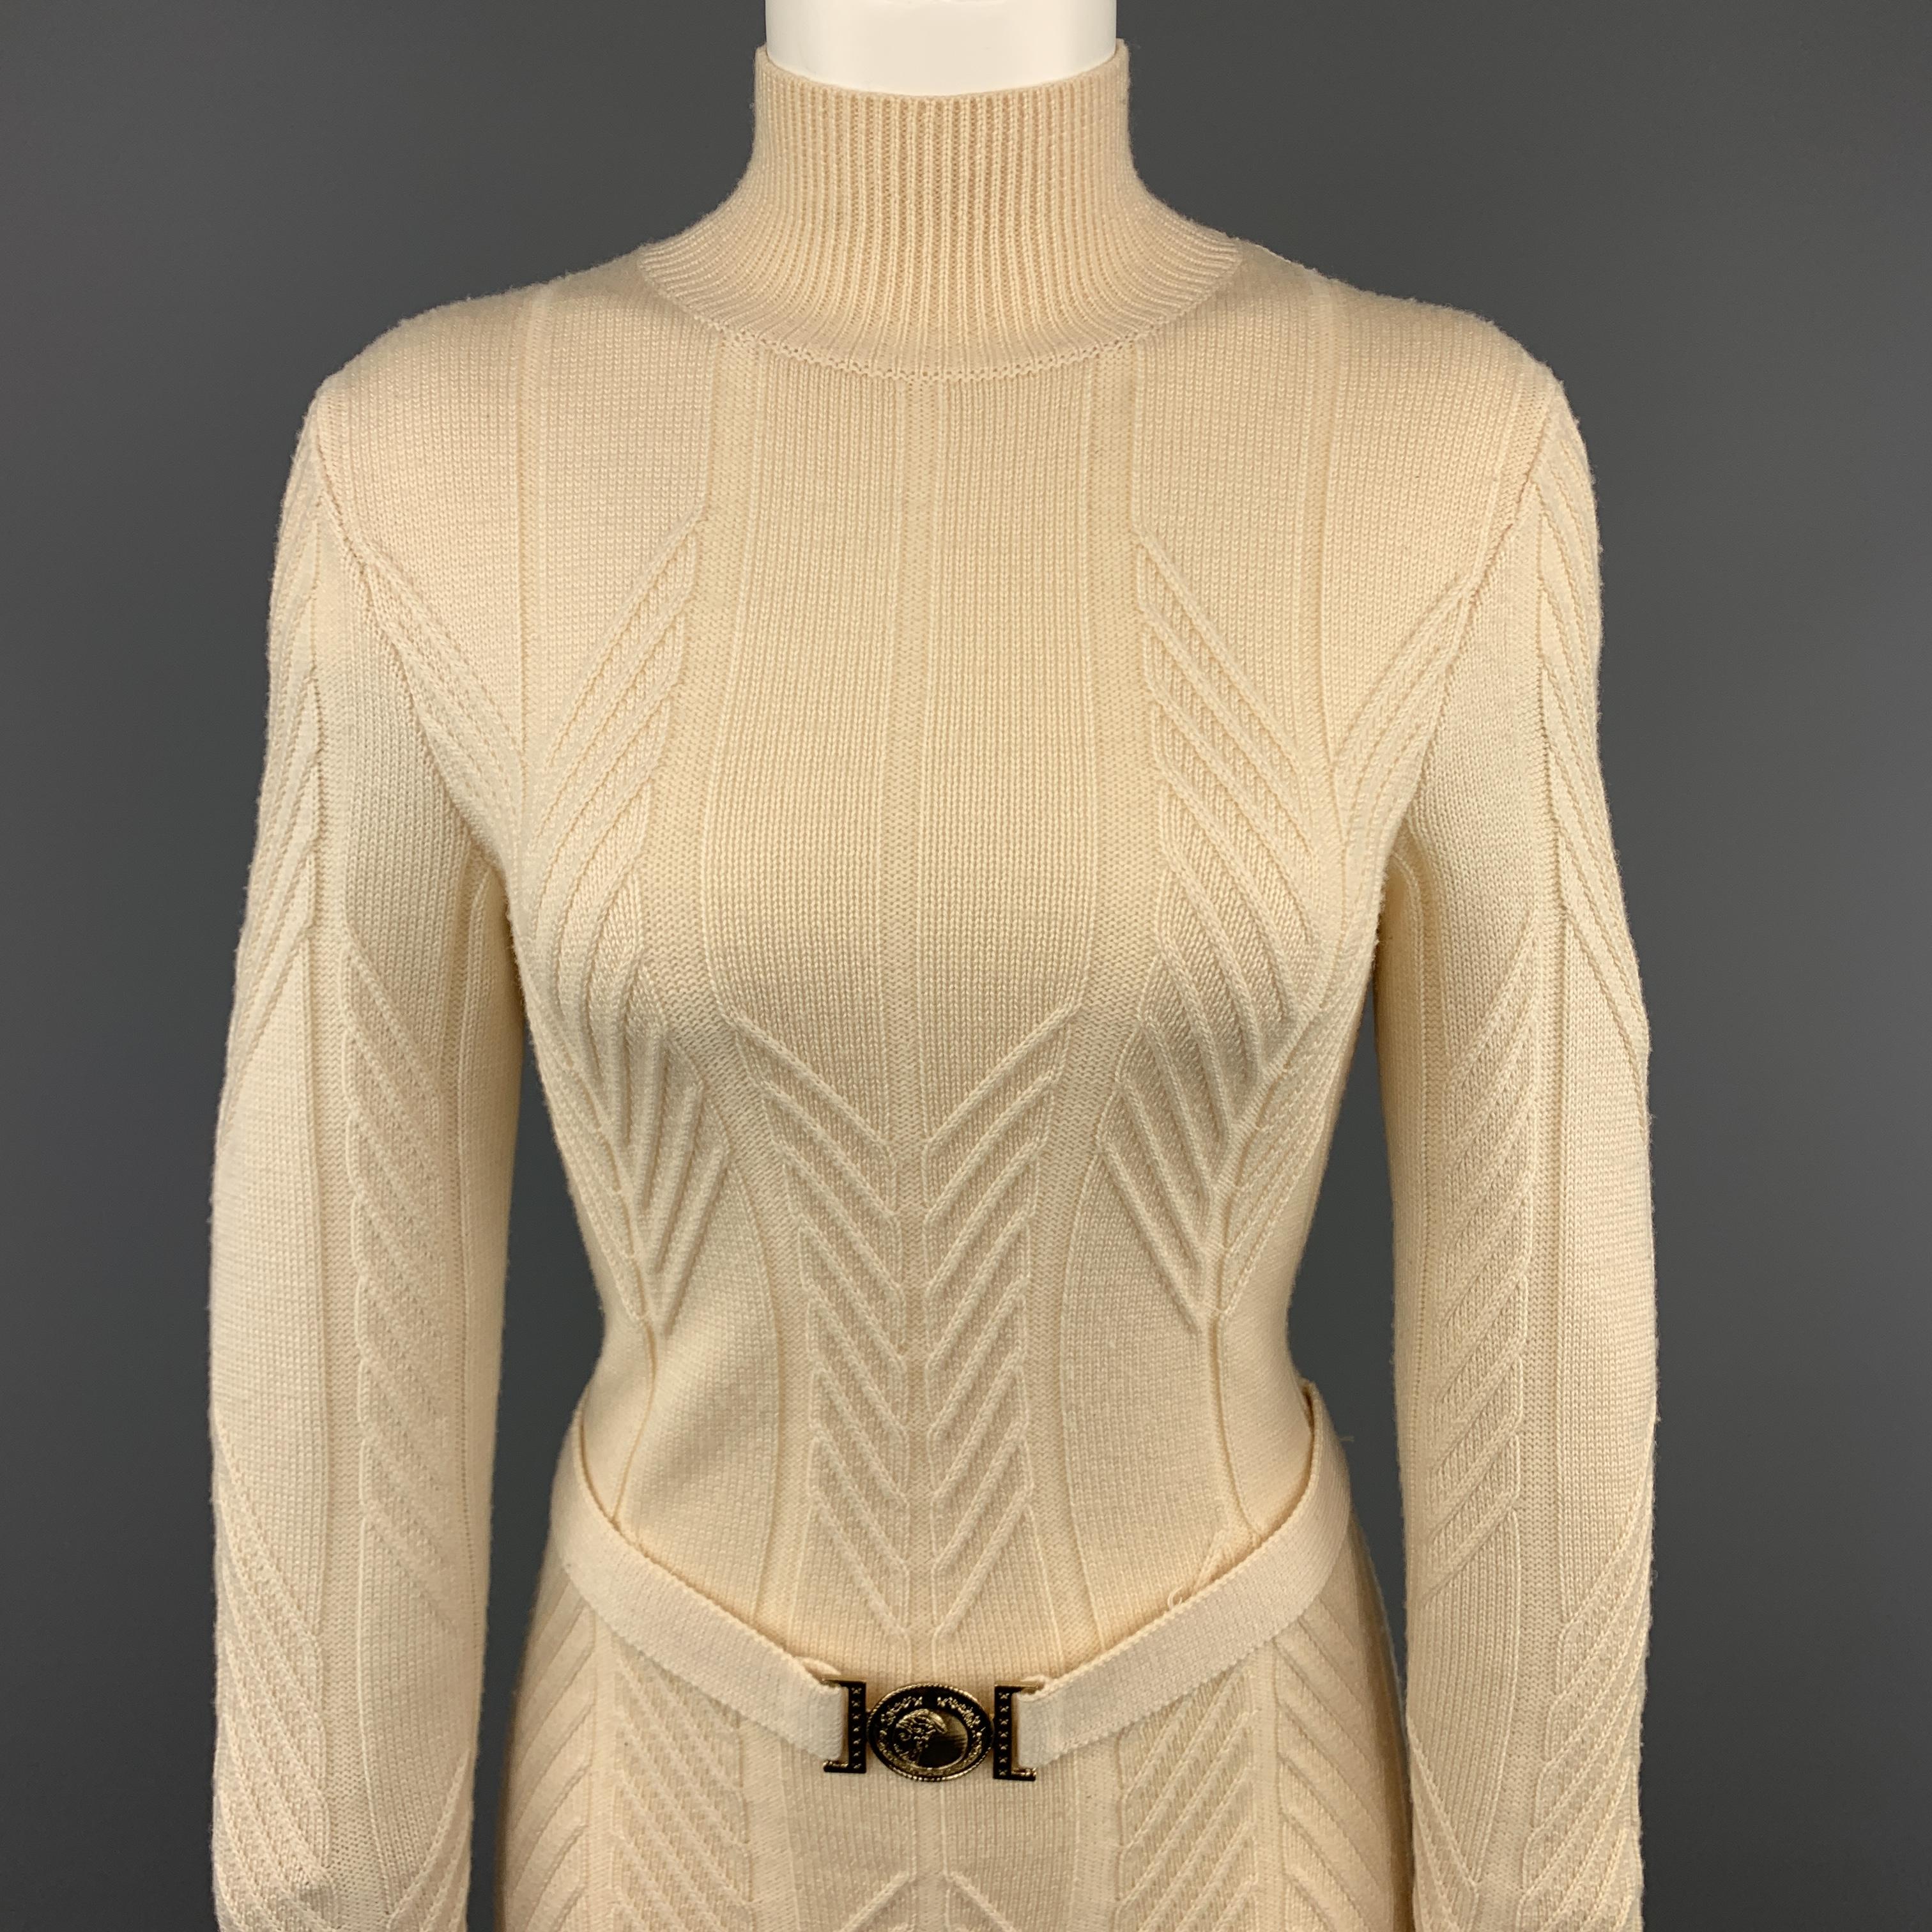 VERSACE COLLECTION pullover sweater comes in cream beige textured knit with a ribbed mock neck and belted front with gold tone Medusa buckle.
 
Very Good Pre-Owned Condition.
Marked: (size tag removed)
 
Measurements:
 
Shoulder: 15 in.
Bust: 34